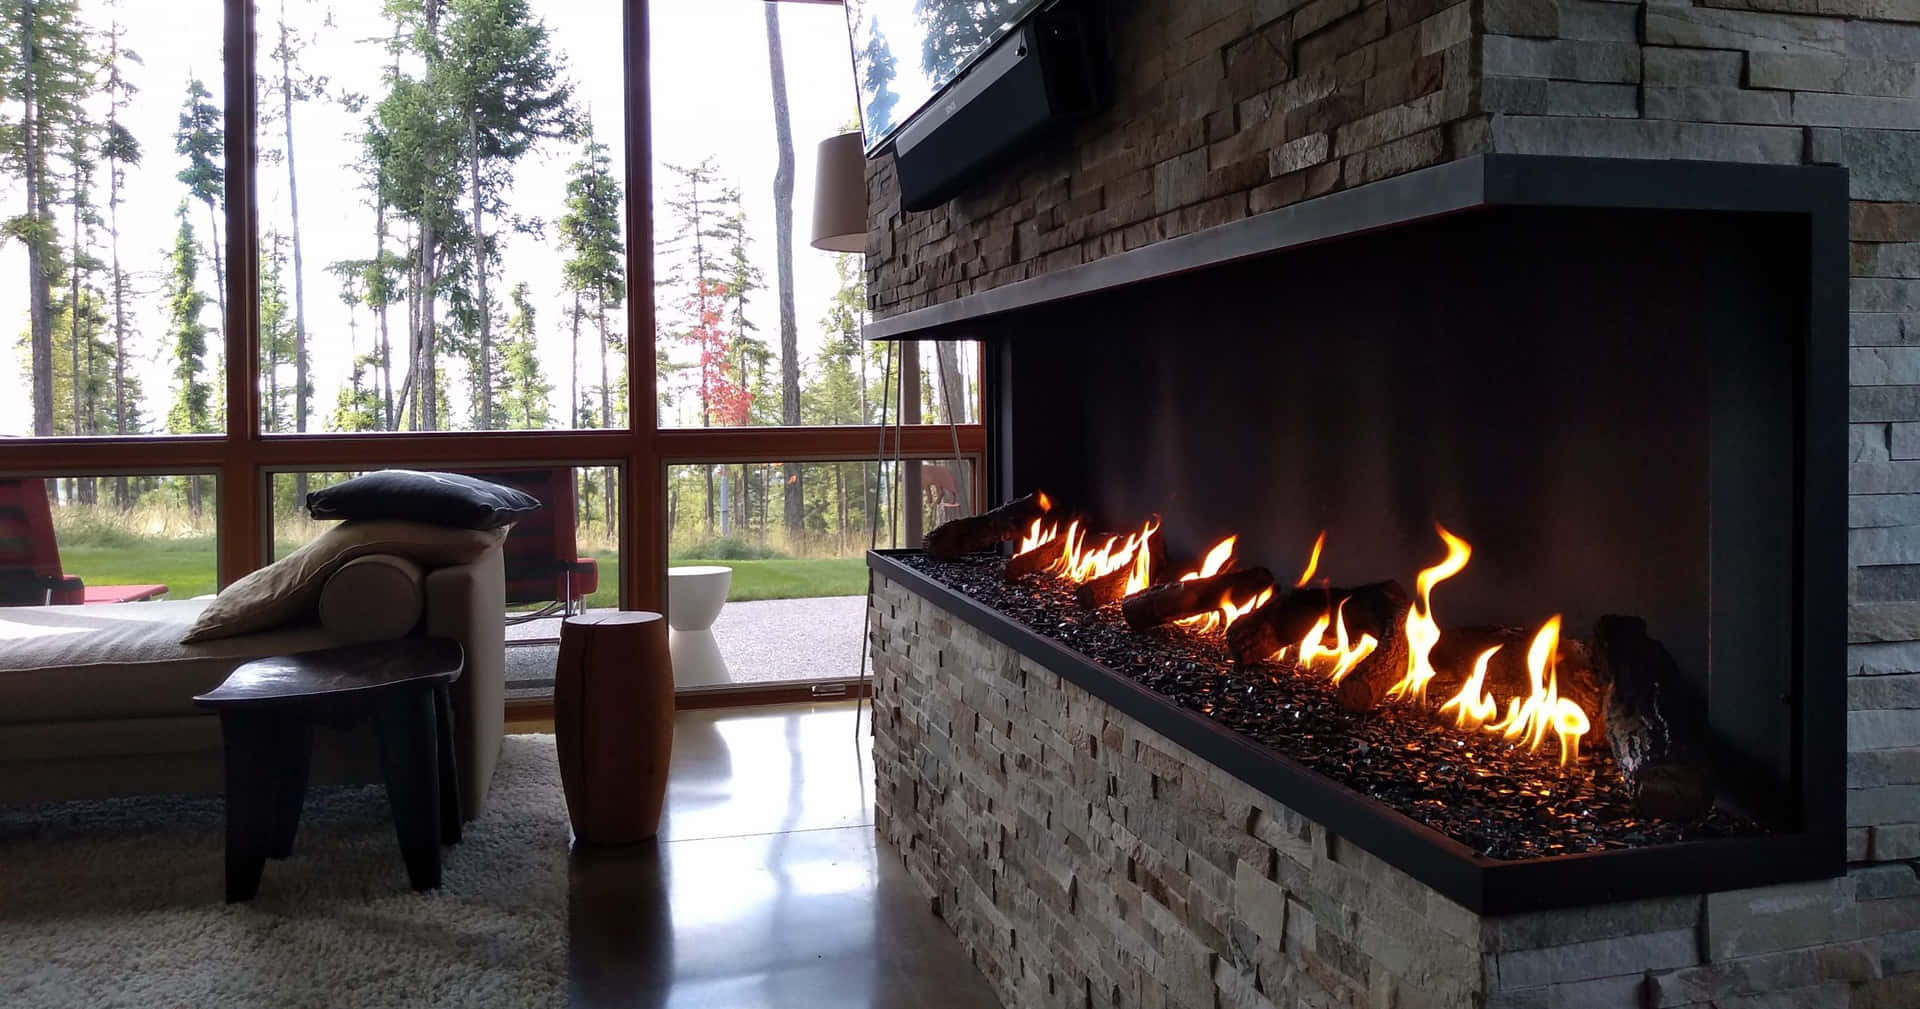 "Warm and Inviting Fireplace Zoom Background"